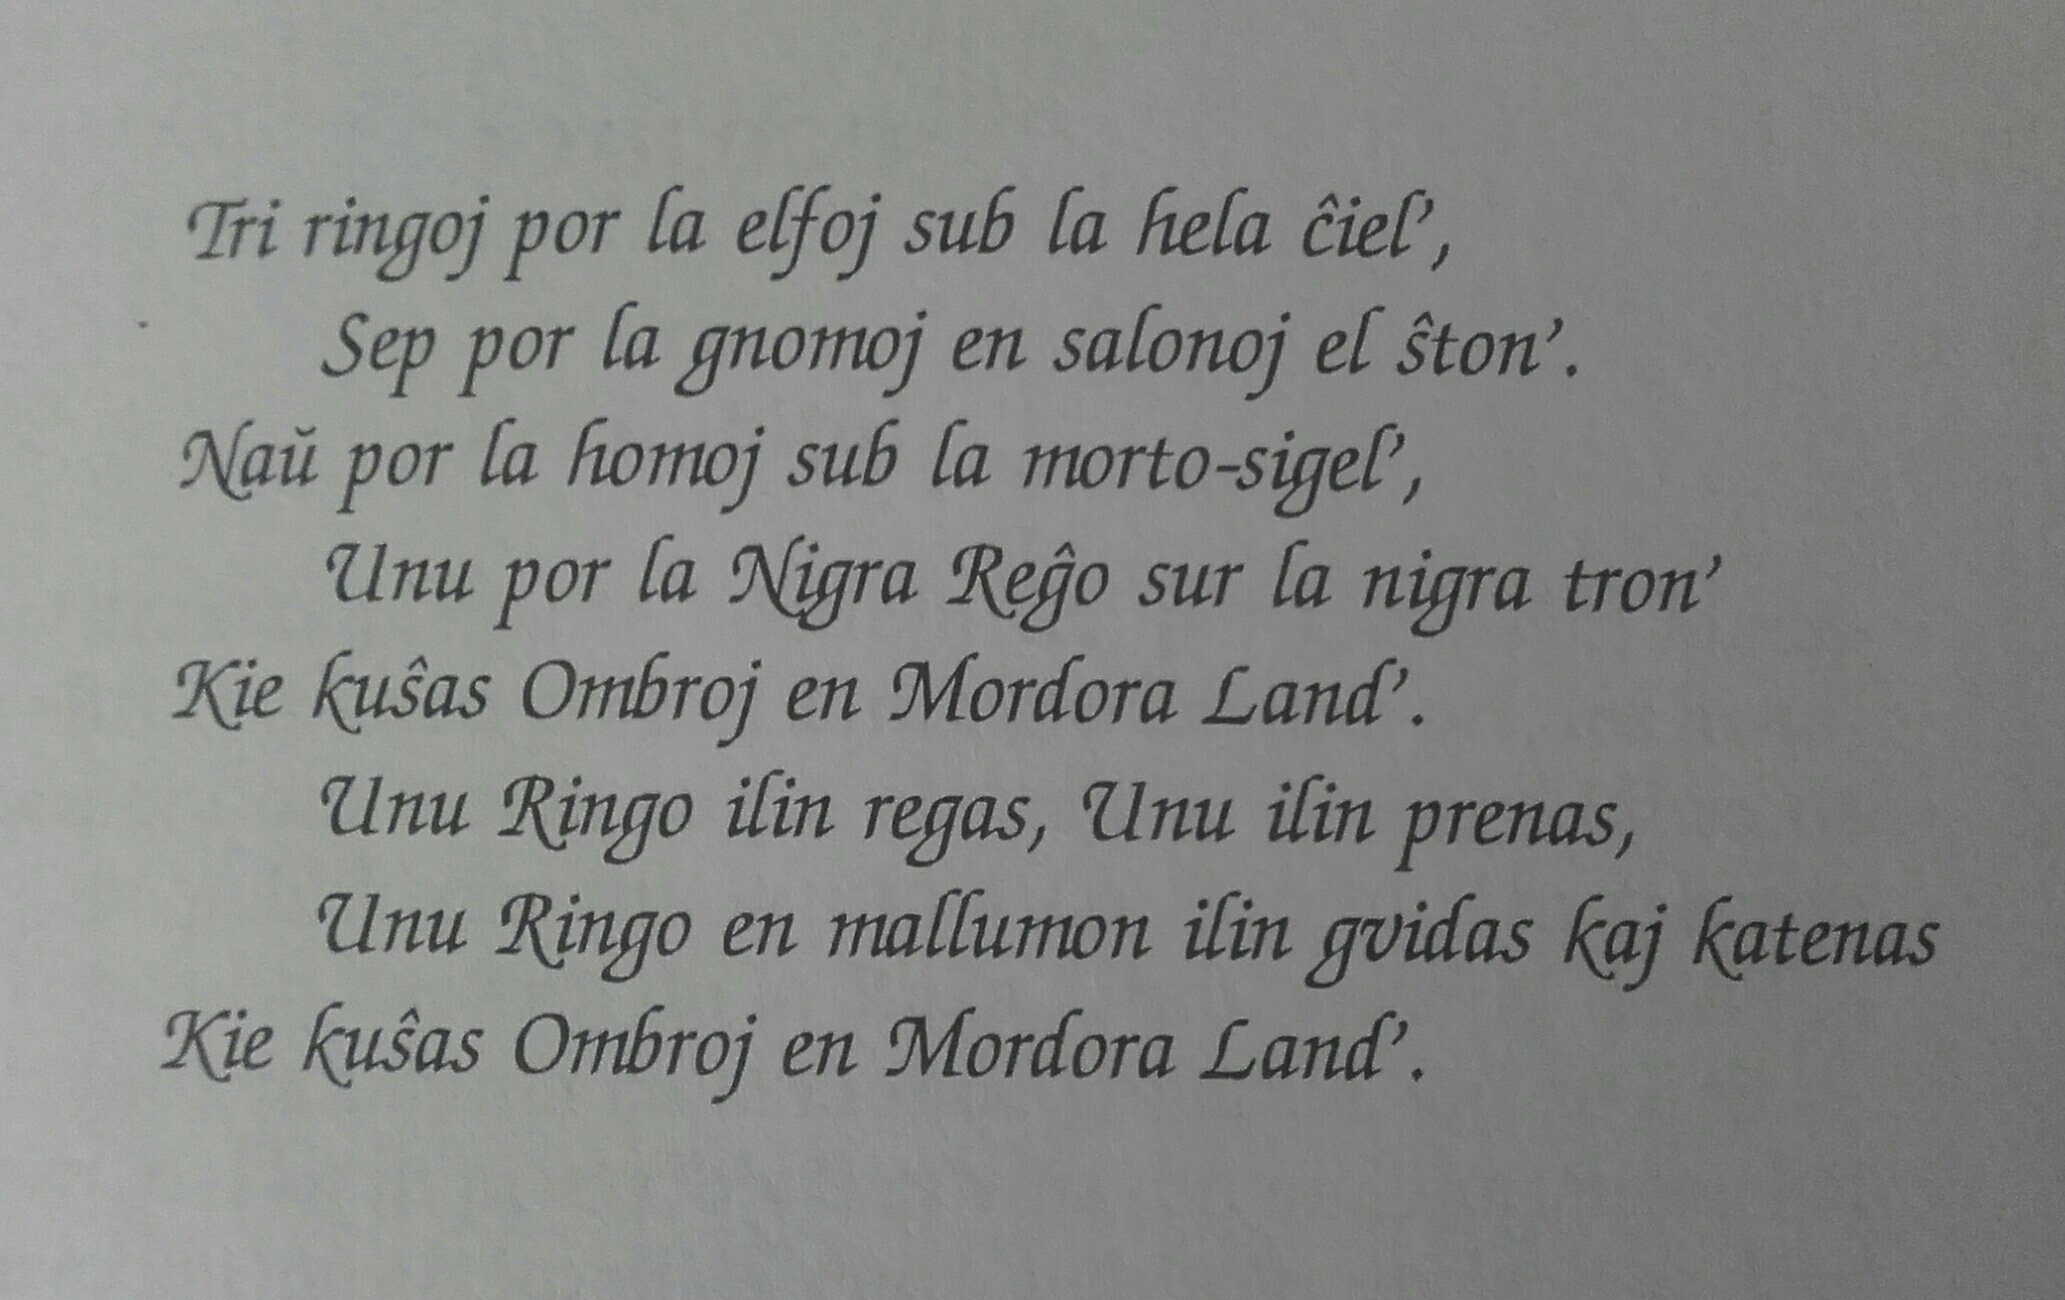 Verdrag Validatie uitdrukking Seta de Maceta on Twitter: "The One Ring poem from The Lord of the Rings,  translated to #Esperanto by William Auld. #LOTR #conlangs #languages  #fantasy #poetry https://t.co/4YQKT7d5y8" / Twitter